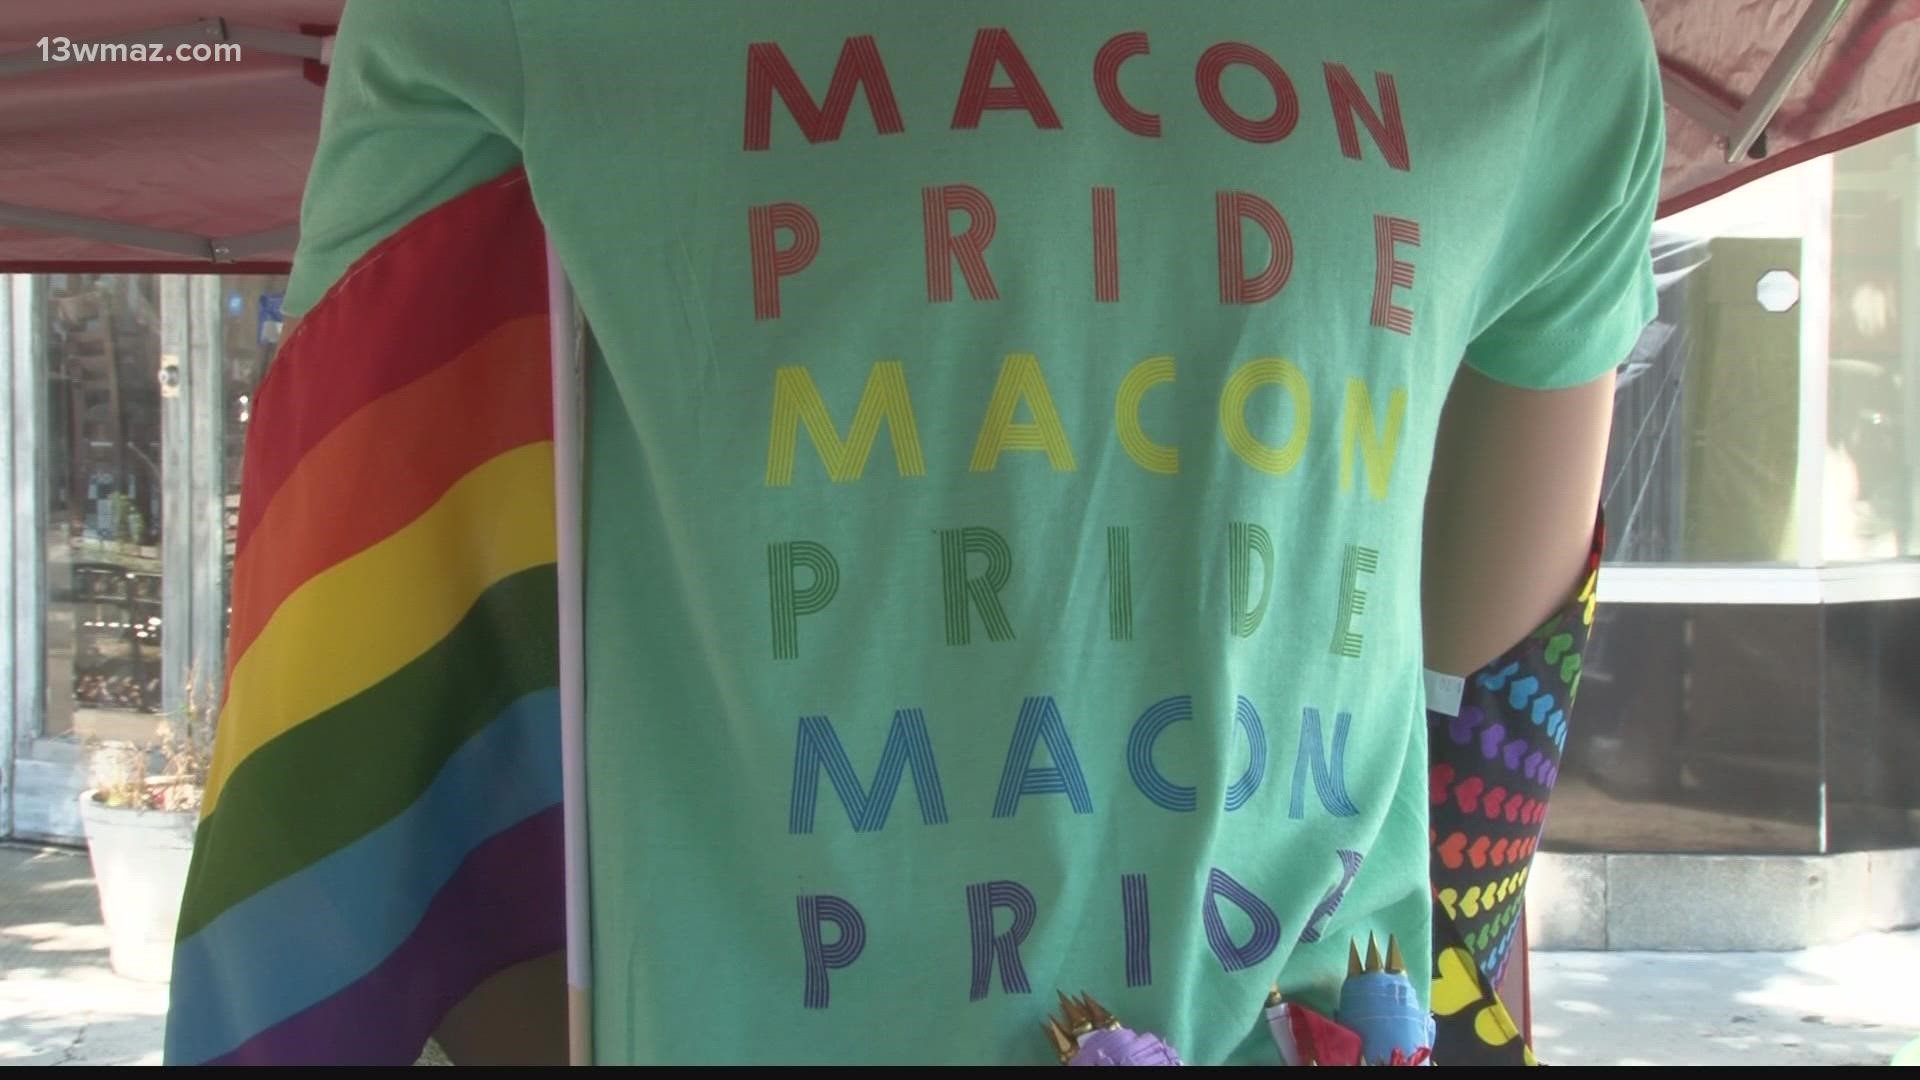 10% of the day's revenue from participating businesses will go towards Macon Pride, and over 20 different businesses from shopping to food will be participating.